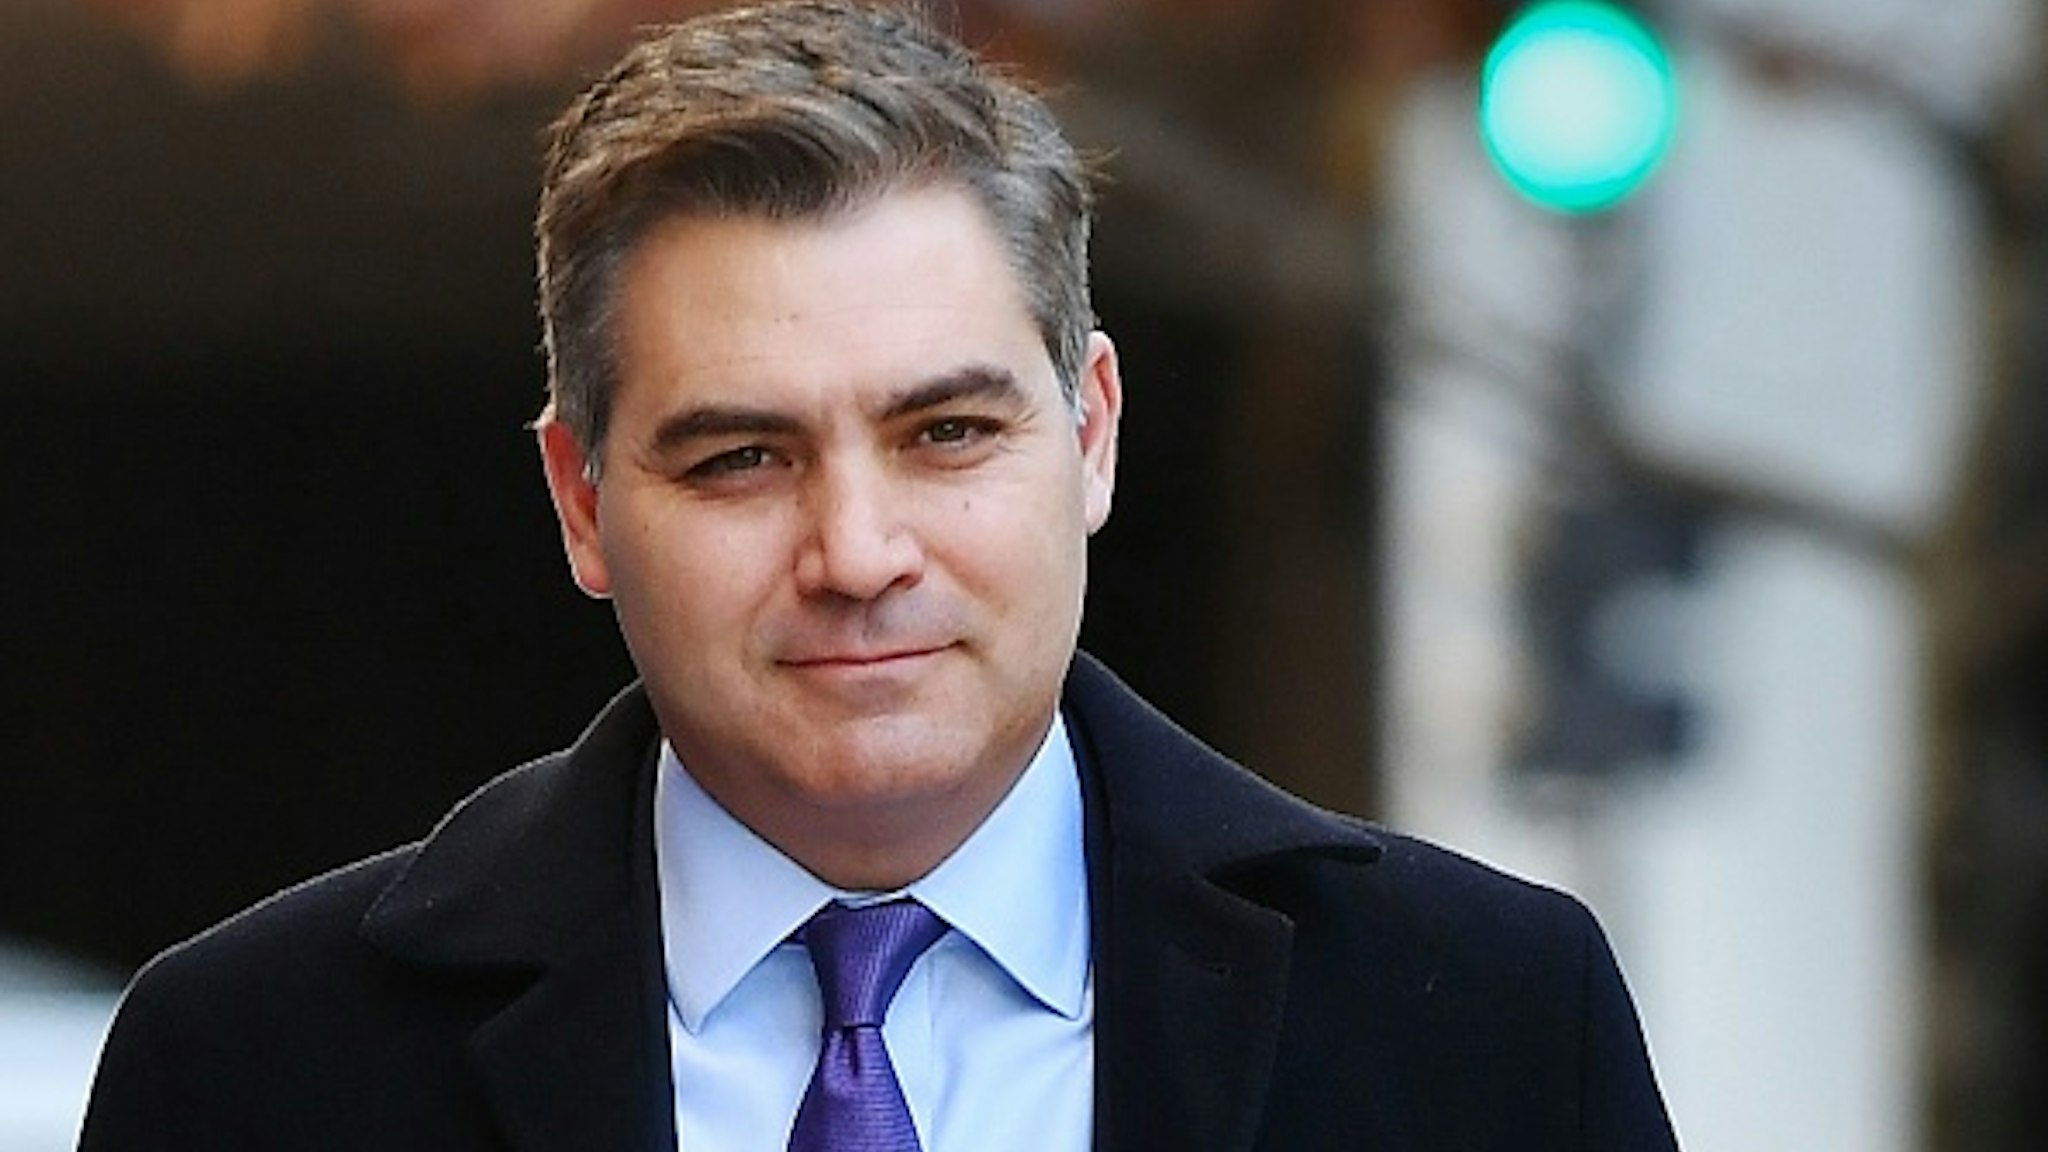 CNN White House correspondent Jim Acosta arrives at US District Court in Washington, DC, on November 16, 2018, where Judge Timothy Kelly ordered the White House to reinstate Acosta's press credentials. - The White House agreed to allow CNN reporter Jim Acosta back in after a judge ruled that the star journalist was improperly banned following a testy exchange at a press conference with President Donald Trump.